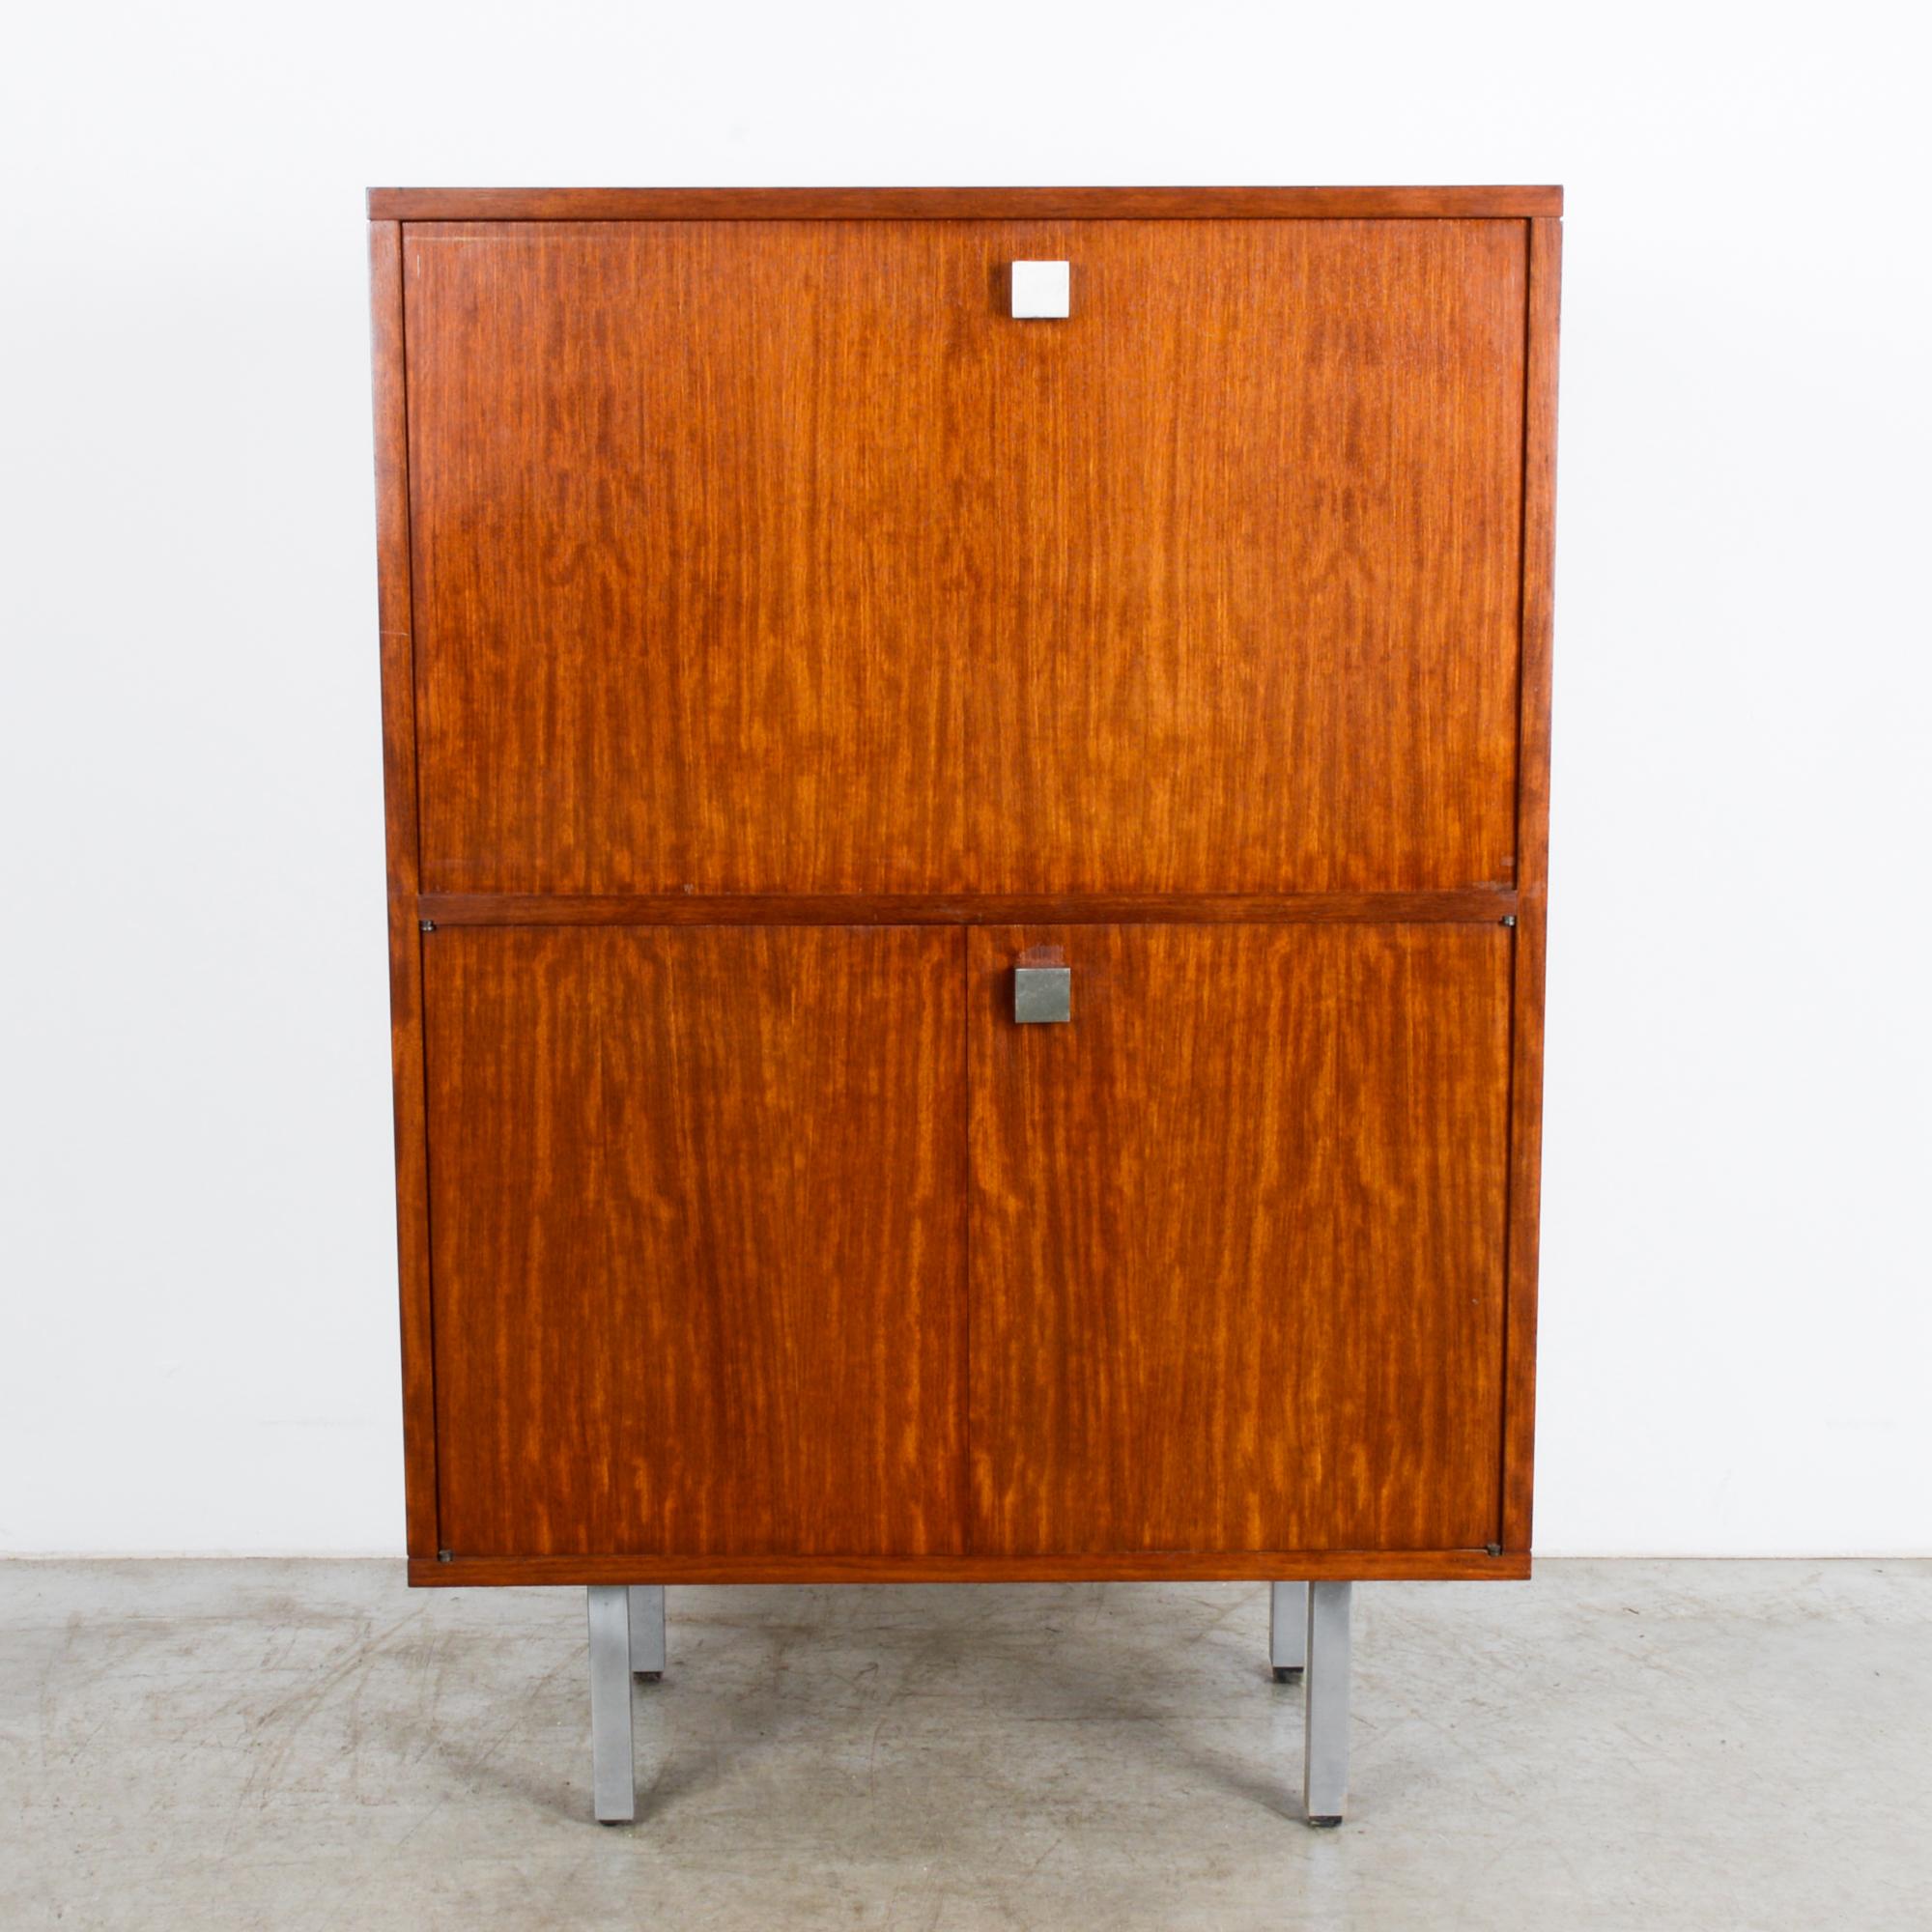 A teak cabinet from Belgium, circa 1960, from the studio of furniture designer Alfred Hendrickx. A cubic cabinet raised on simple silver legs, cleverly stores a concealed secretary desk. An upper door folds down to reveal a writing desk, complete